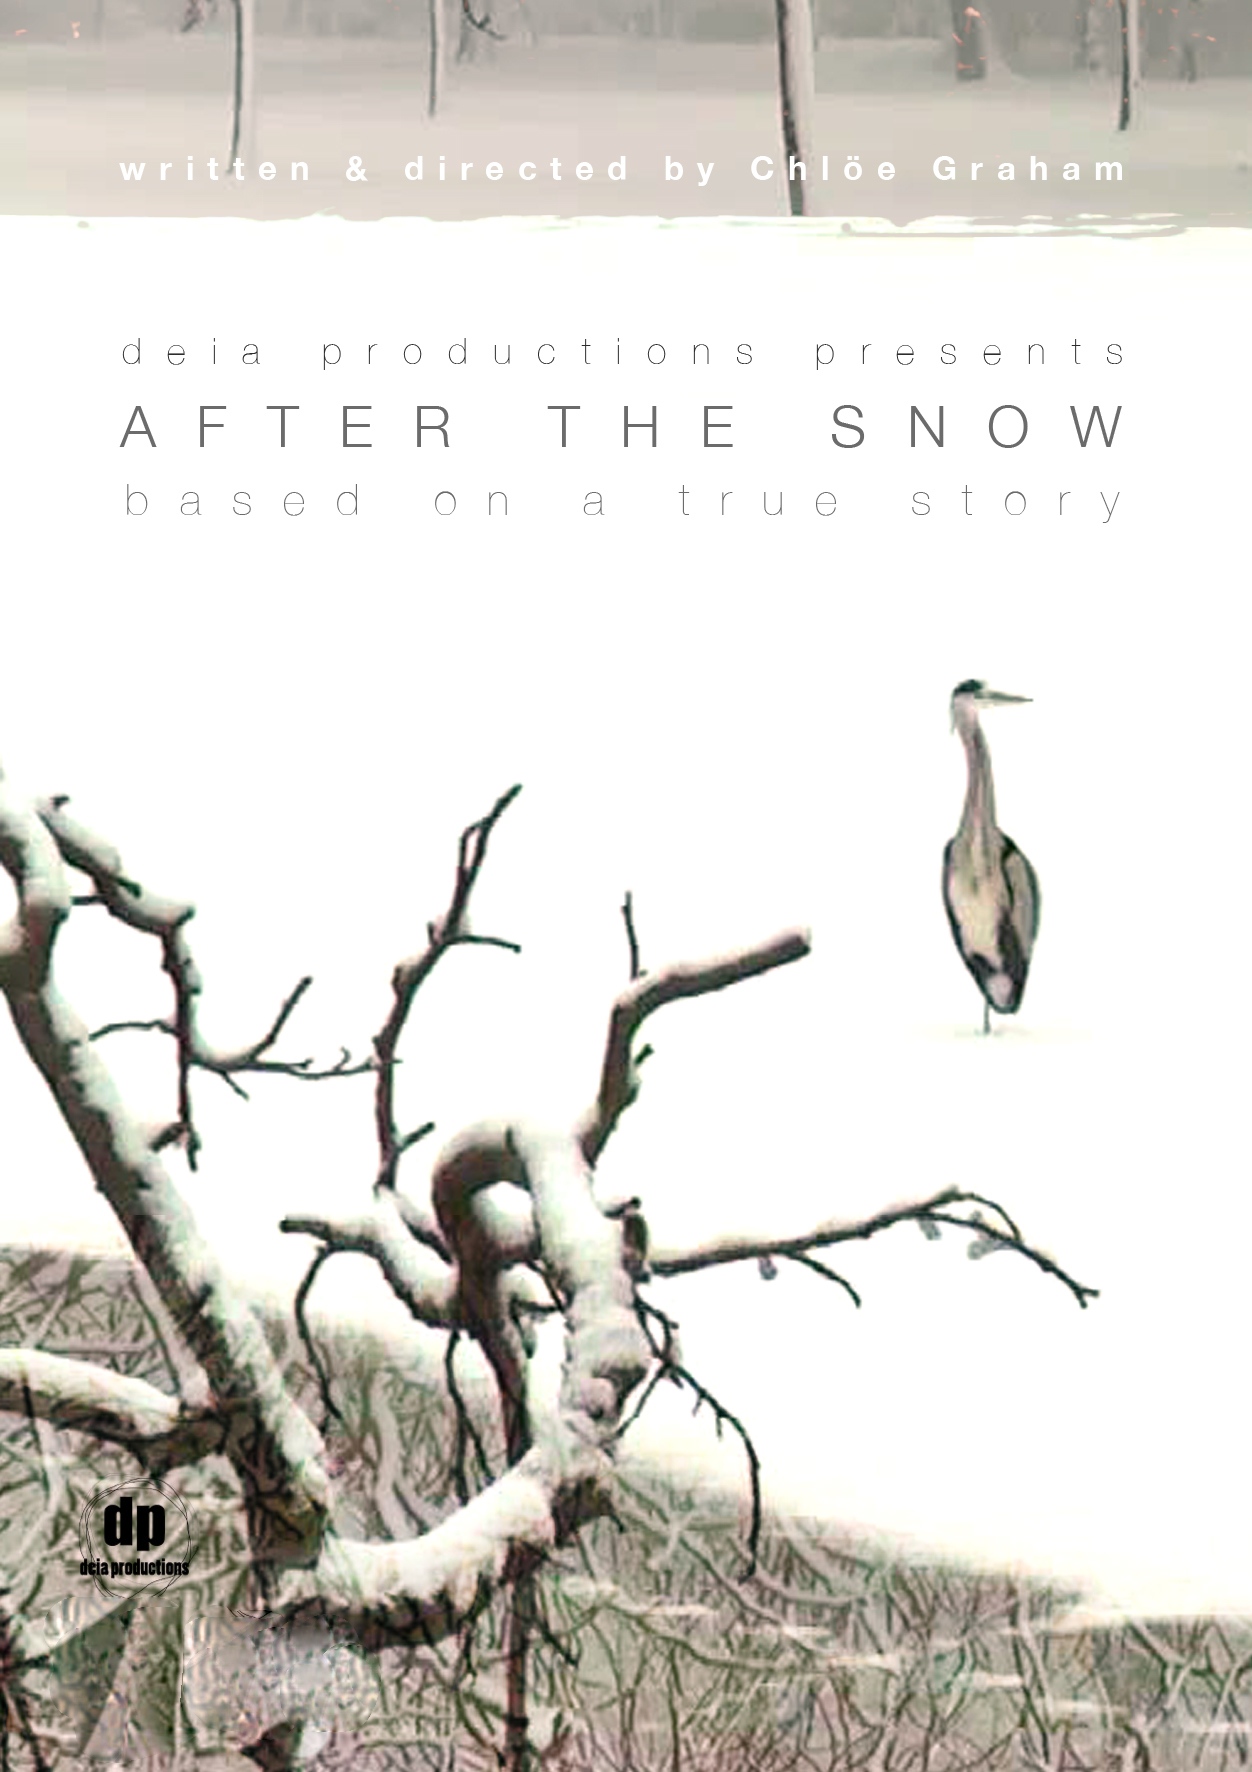 After The Snow Short Film 13 minutes 45 seconds 2014